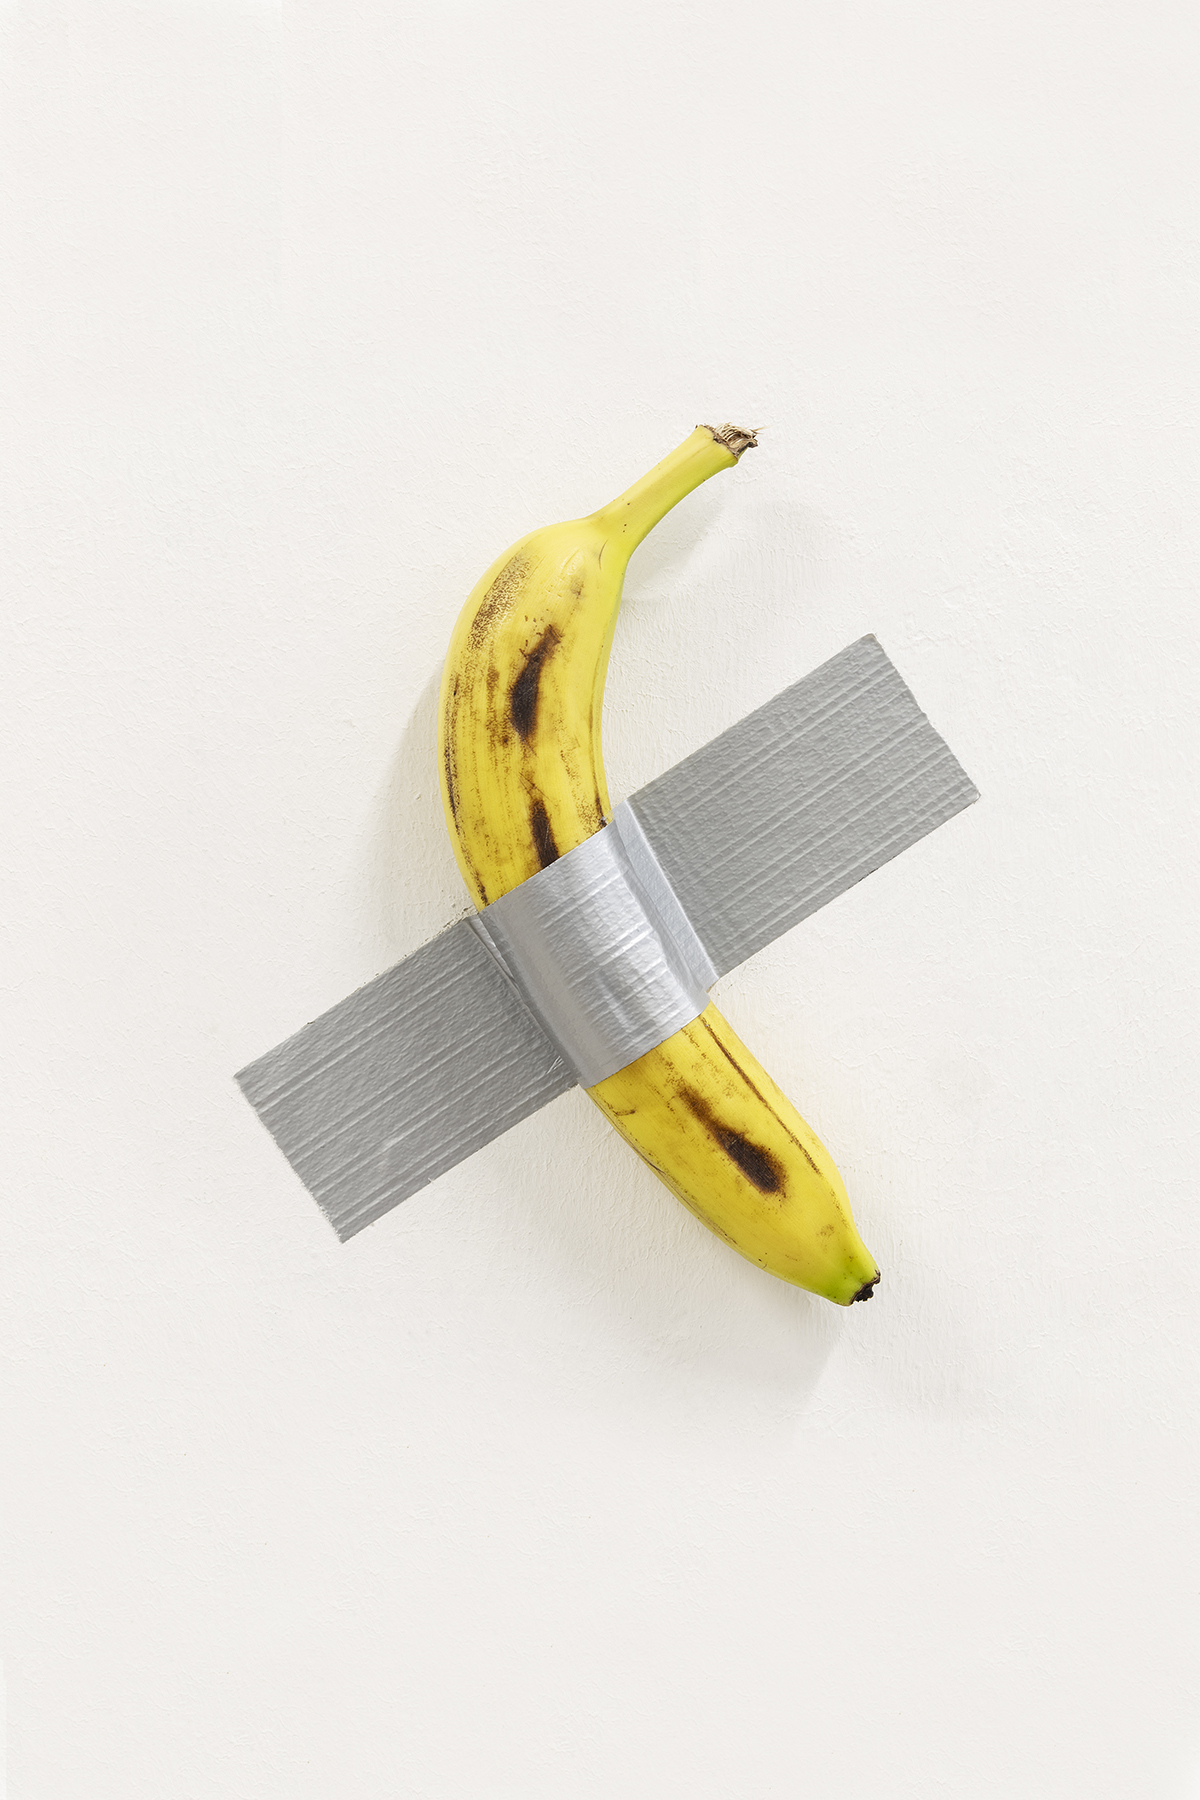 A banana taped to the wall